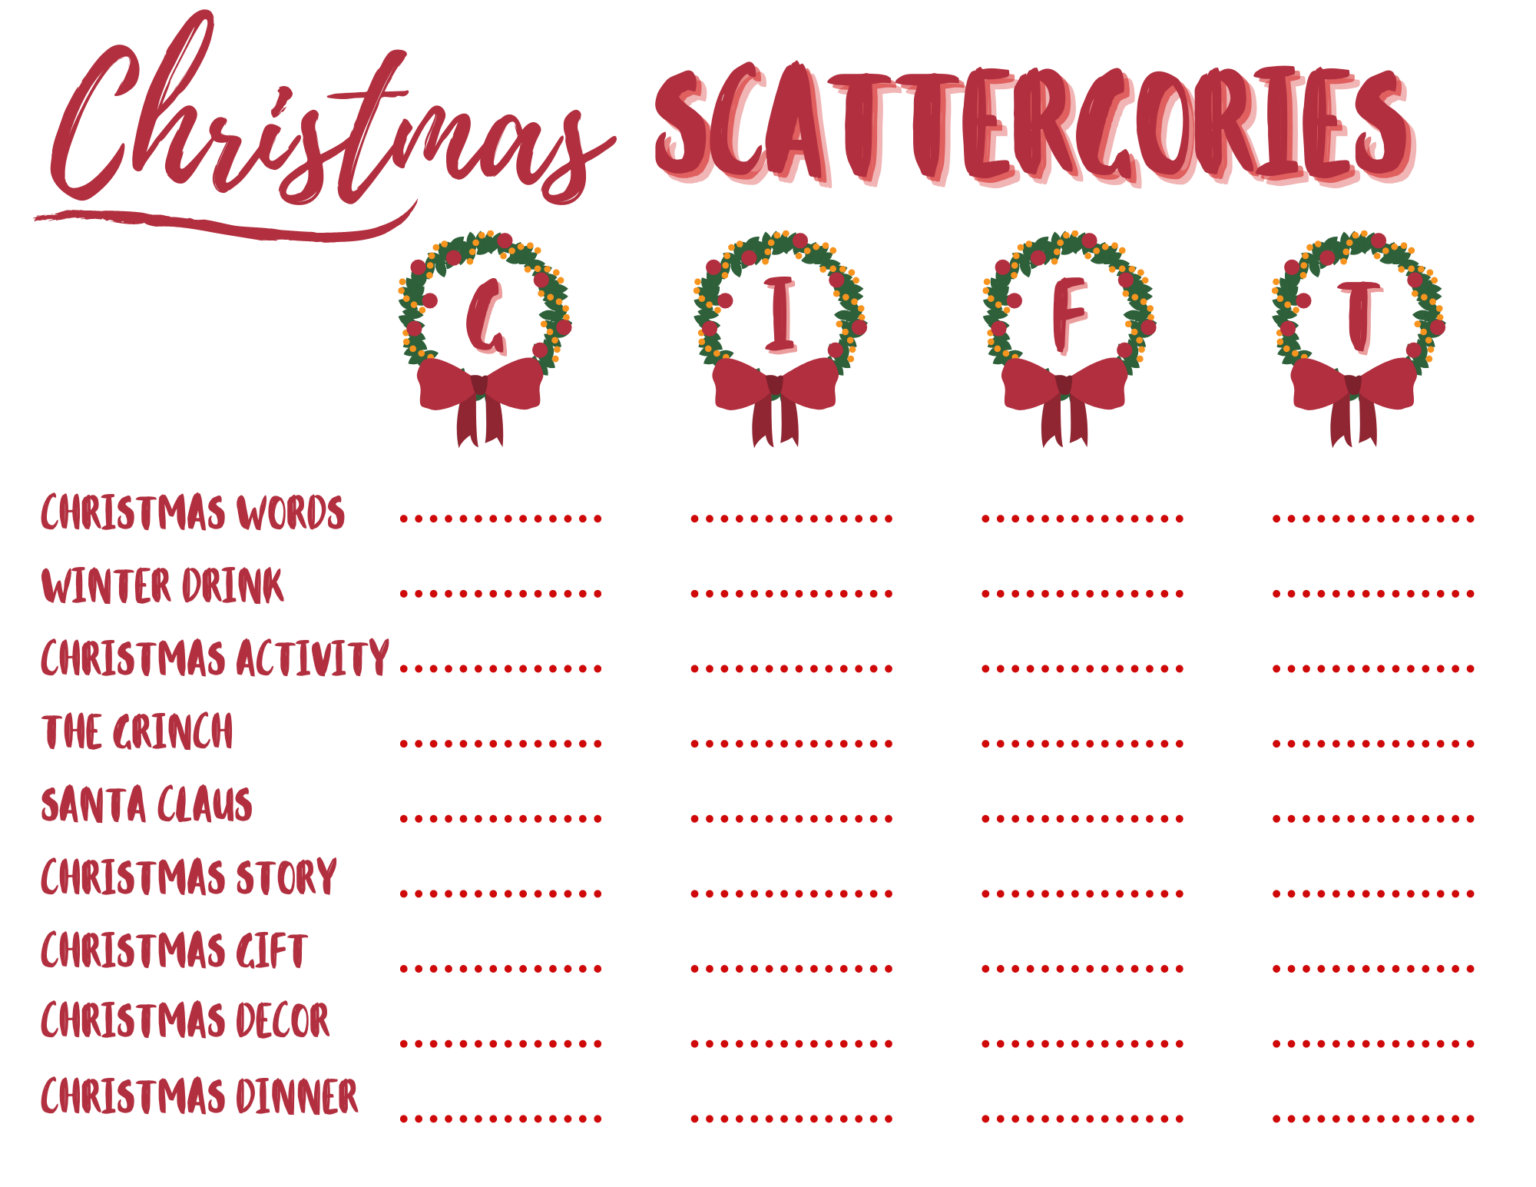 Christmas Scattergories Printable for Holiday Game Night